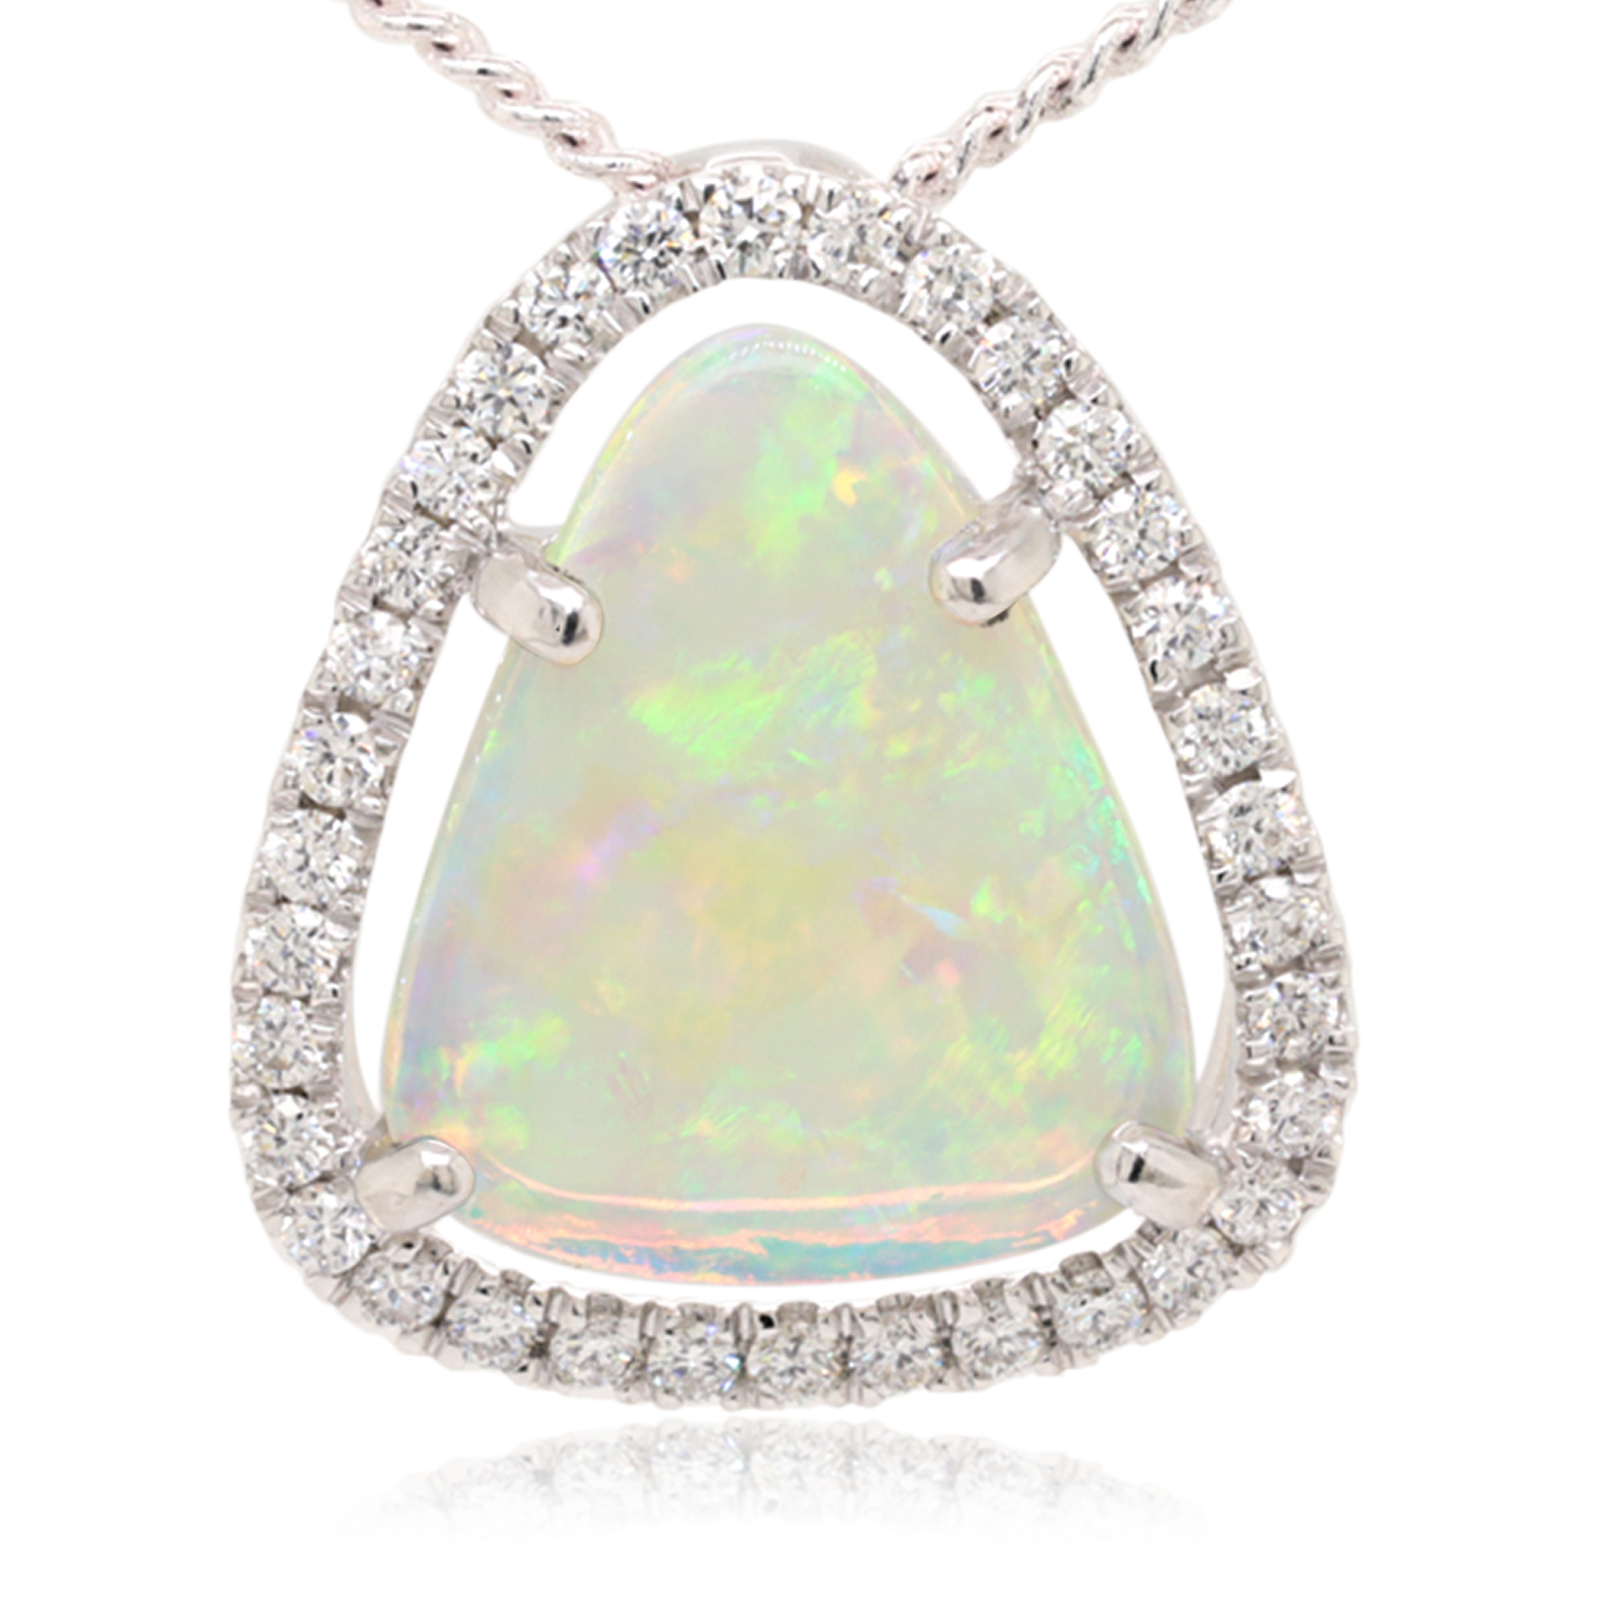 White Gold Crystal Opal Pendant